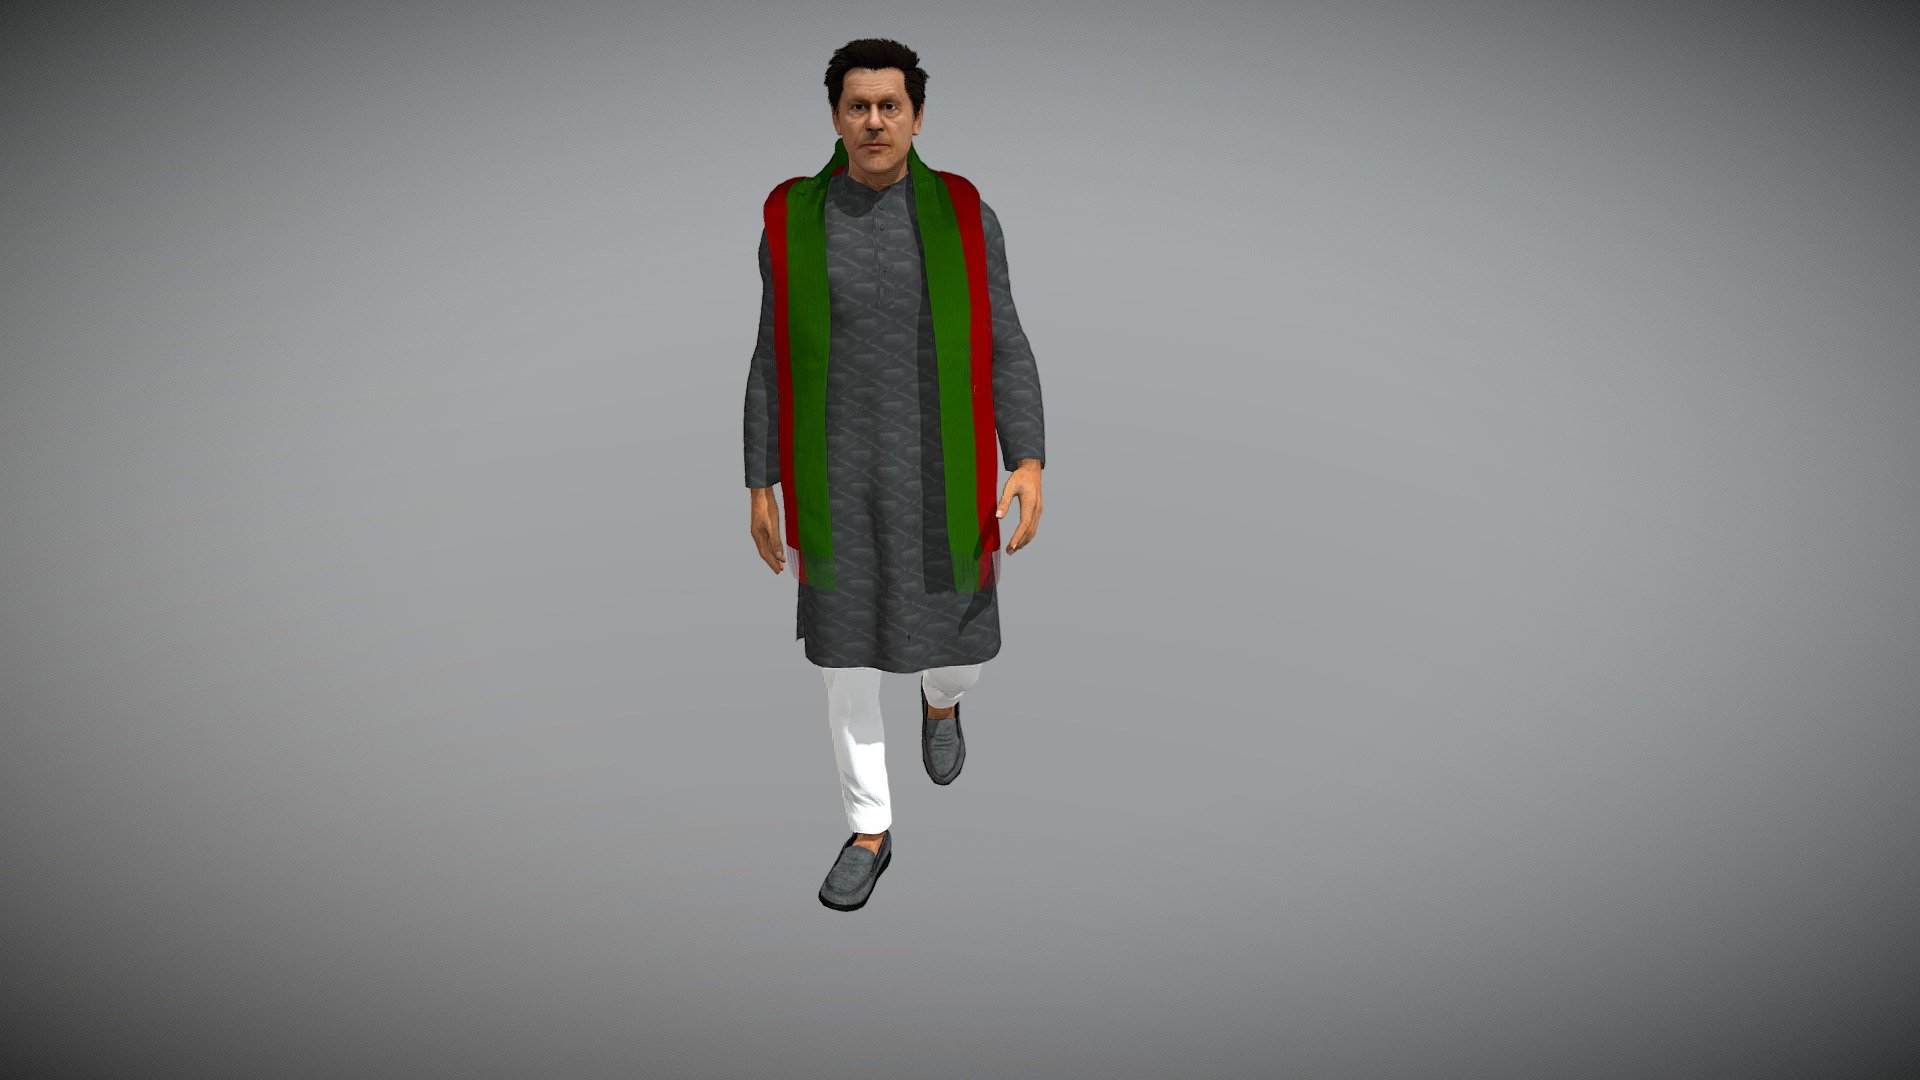 WATCH  = https://youtu.be/TS44GNacd0U
Imran Khan Realistic Character


PACKAGE INCLUDE



High quality polygonal model, correctly scaled for an accurate representation of the original object.

High Detailed Photorealistic IMRAN KHAN.

Model is built to real-world scale.

Many different format like blender, fbx, obj, iclone, dae

Separate Loopable Animations

Ready for animation &amp; 3D Printing

High Quality materials and textures

Triangles = 42136

Vertices = 34048

Edges = 65827

Faces = 38635


ANIMATIONS



Walk

Talk

Neck Twist


3D PRINTING (OBJ | STL)



STAND 1

STAND 2

STAND 3

STAND 4

STAND 5

WALK

SPORT STANCE

FIGHT POSE

SIT

SIT ON CHAIR


NOTE



GIVE CREDIT BILAL CREATION PRODUCTION

SUBSCRIBE YOUTUBE CHANNEL = https://www.youtube.com/BilalCreation/playlists

FOLLOW OUR STORE = https://sketchfab.com/bilalcreation/models

LIKE AND GIVE FEEDBACK ON THE MODEL


CONTACT US                 =  https://sites.google.com/view/bilalcreation/contact-us - Imran Khan with Animation - Buy Royalty Free 3D model by Bilal Creation Production (@bilalcreation) 3d model